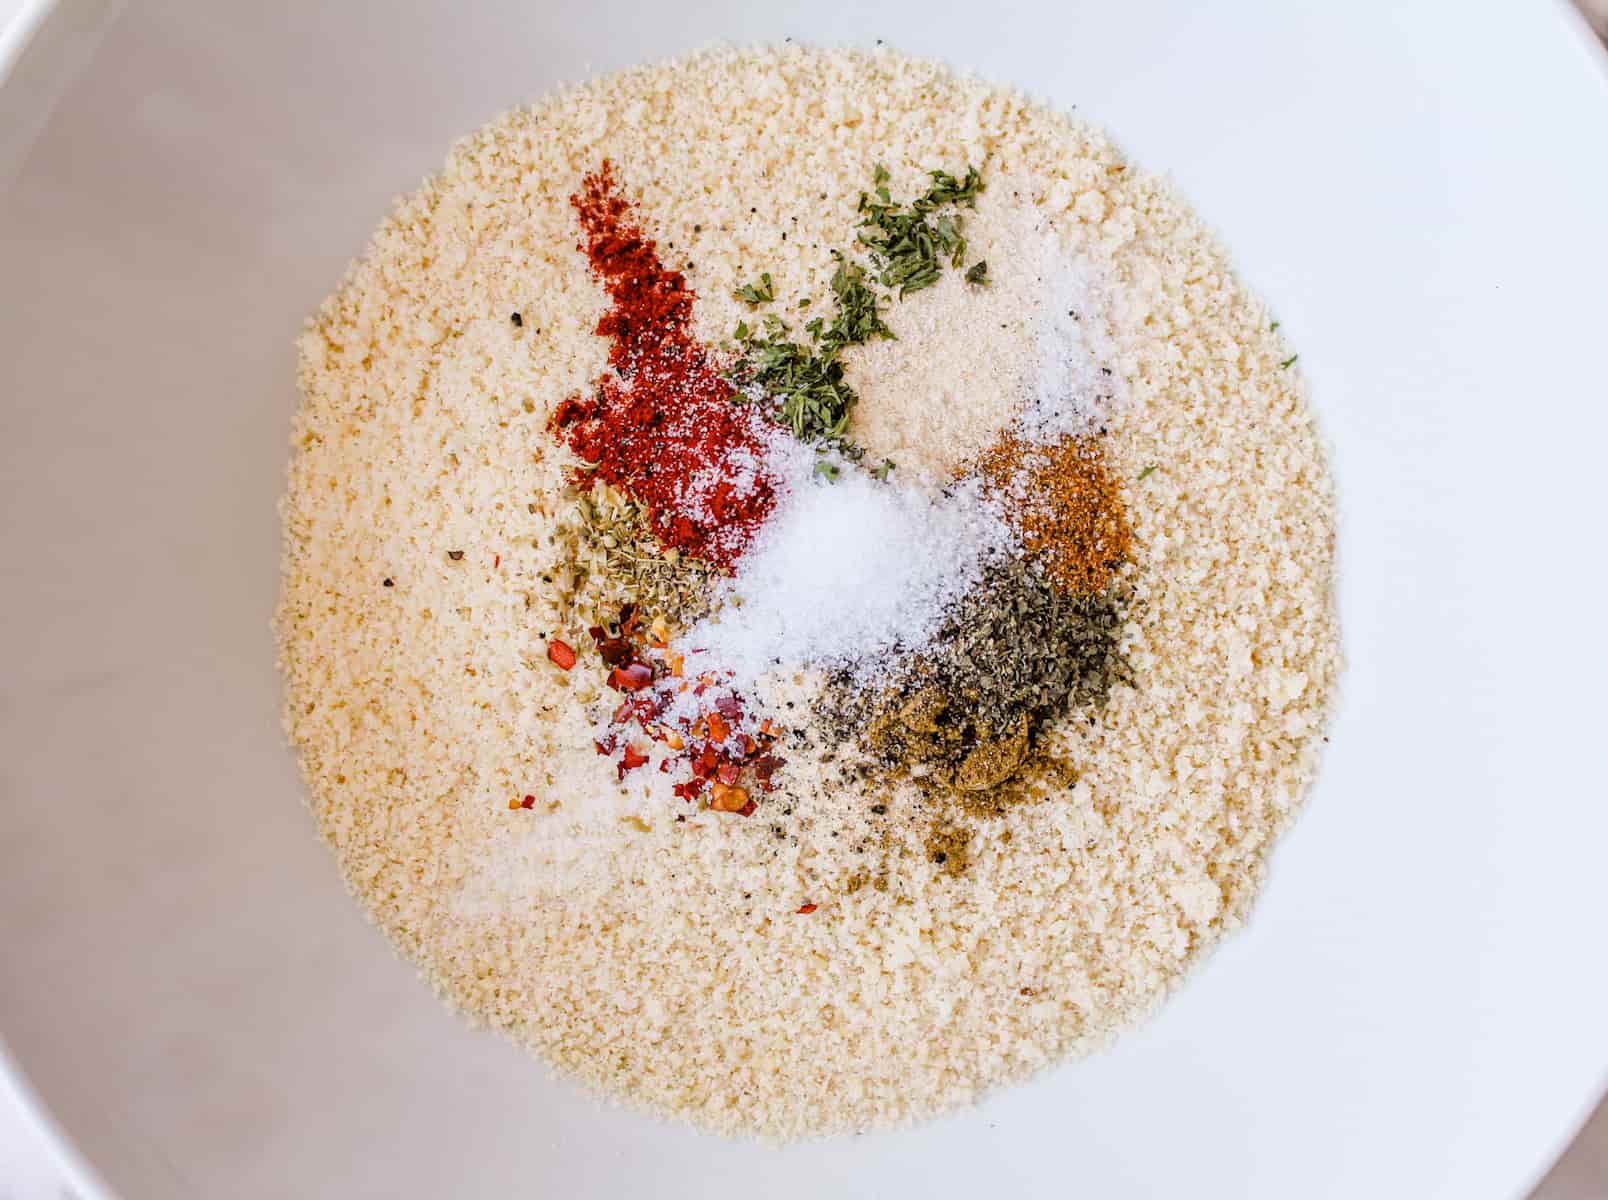 almond flour and spices in a mixing bowl.